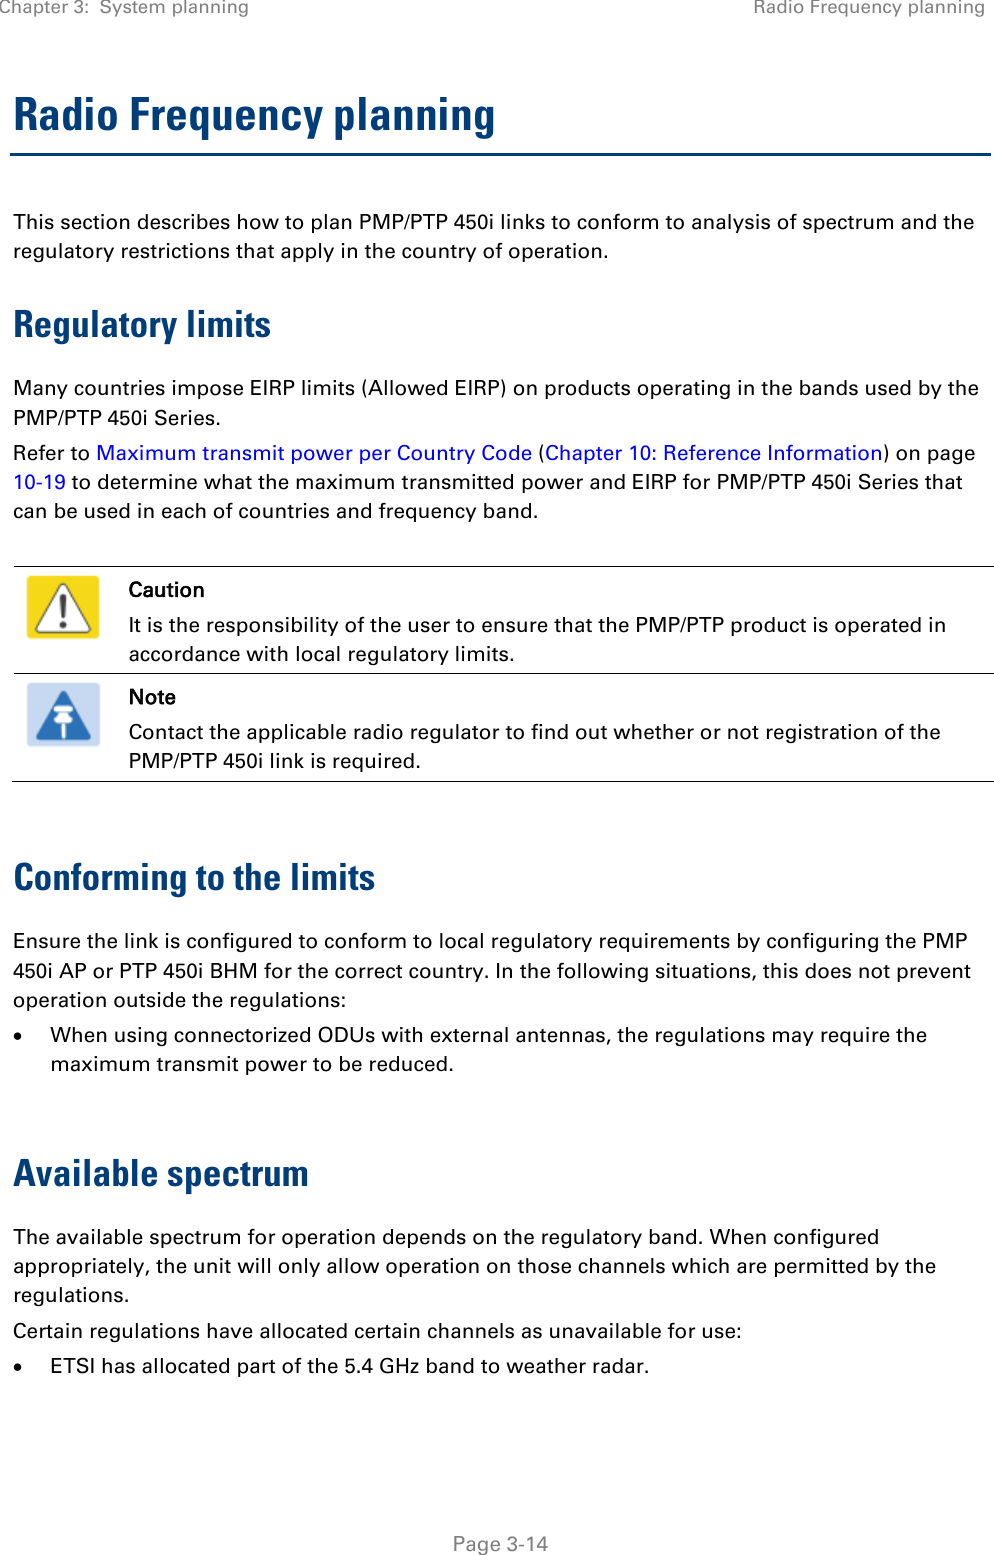 Chapter 3:  System planning Radio Frequency planning   Page 3-14 Radio Frequency planning This section describes how to plan PMP/PTP 450i links to conform to analysis of spectrum and the regulatory restrictions that apply in the country of operation. Regulatory limits Many countries impose EIRP limits (Allowed EIRP) on products operating in the bands used by the PMP/PTP 450i Series.  Refer to Maximum transmit power per Country Code (Chapter 10: Reference Information) on page 10-19 to determine what the maximum transmitted power and EIRP for PMP/PTP 450i Series that can be used in each of countries and frequency band.   Caution It is the responsibility of the user to ensure that the PMP/PTP product is operated in accordance with local regulatory limits.  Note Contact the applicable radio regulator to find out whether or not registration of the PMP/PTP 450i link is required.  Conforming to the limits Ensure the link is configured to conform to local regulatory requirements by configuring the PMP 450i AP or PTP 450i BHM for the correct country. In the following situations, this does not prevent operation outside the regulations: • When using connectorized ODUs with external antennas, the regulations may require the maximum transmit power to be reduced.  Available spectrum The available spectrum for operation depends on the regulatory band. When configured appropriately, the unit will only allow operation on those channels which are permitted by the regulations.  Certain regulations have allocated certain channels as unavailable for use: • ETSI has allocated part of the 5.4 GHz band to weather radar. 